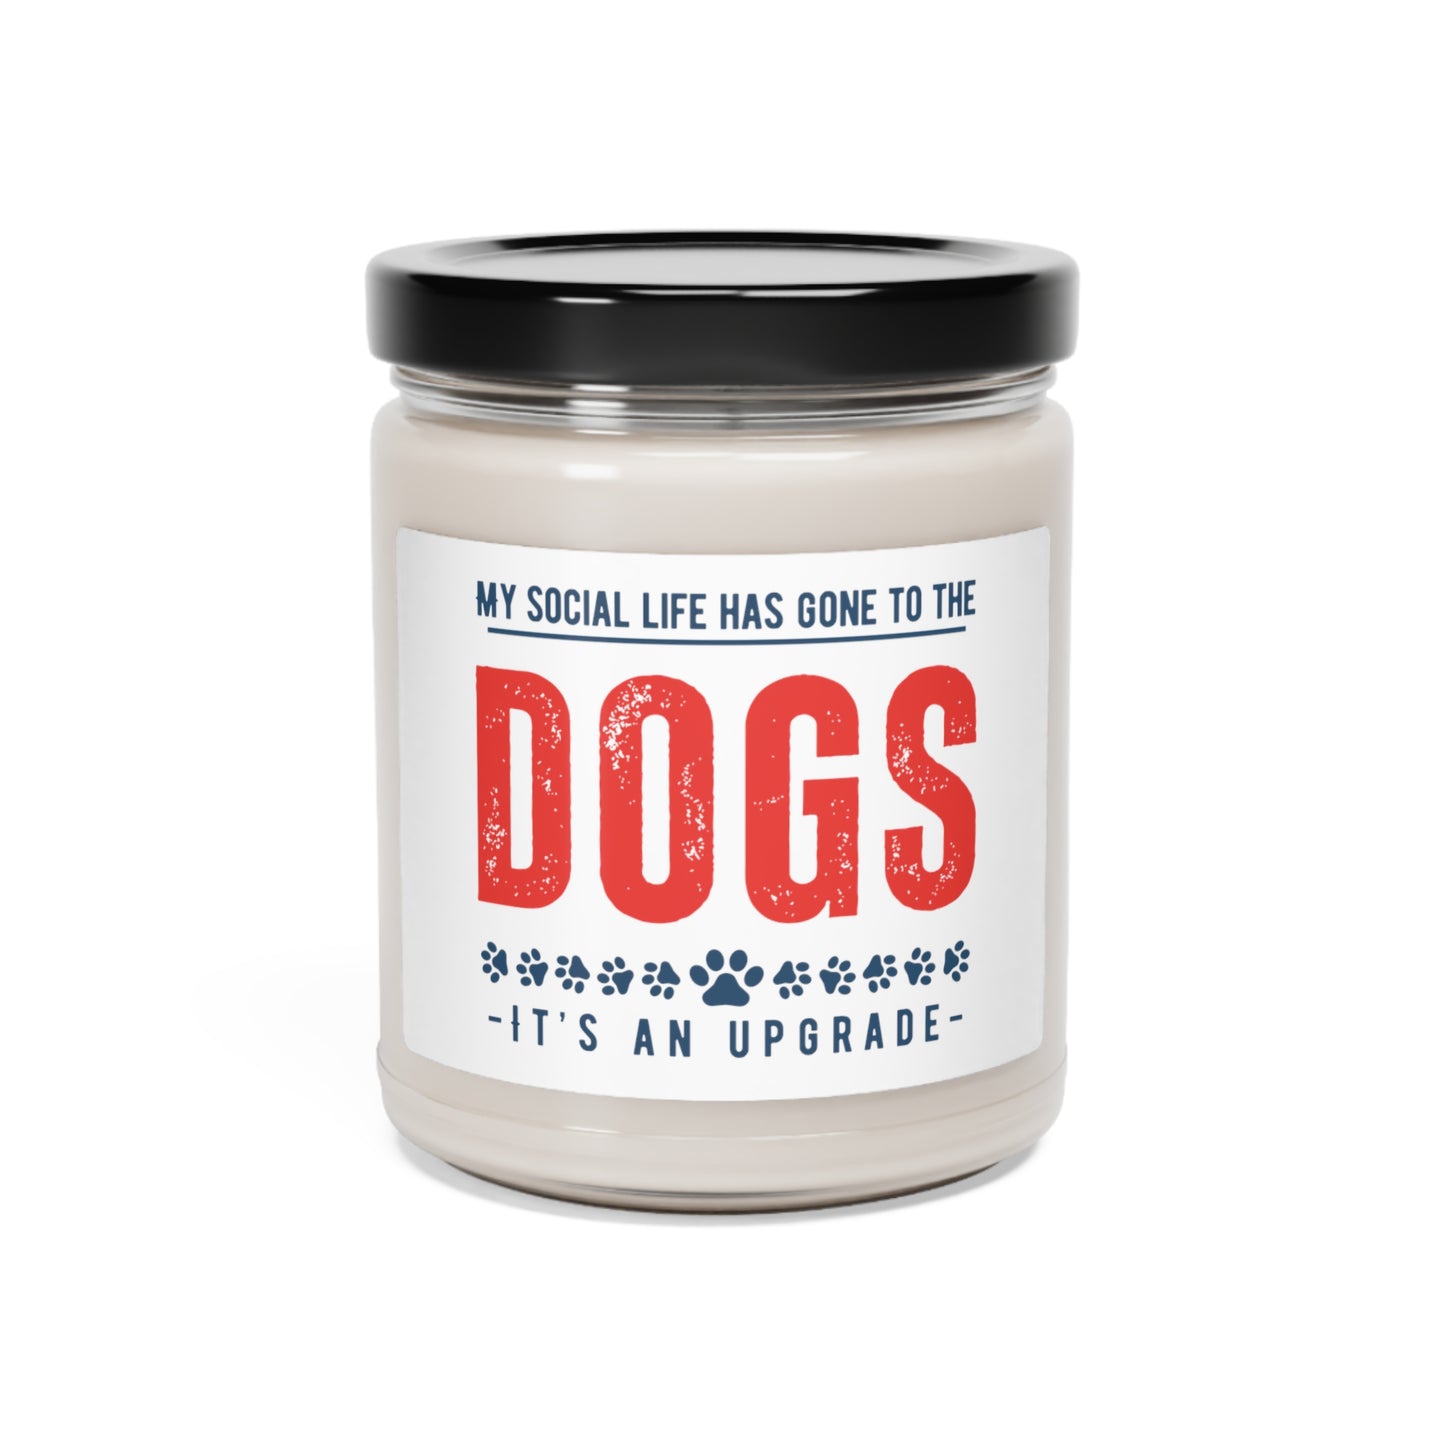 My Social Life Has Gone To The Dogs Scented Soy Candle, 9oz